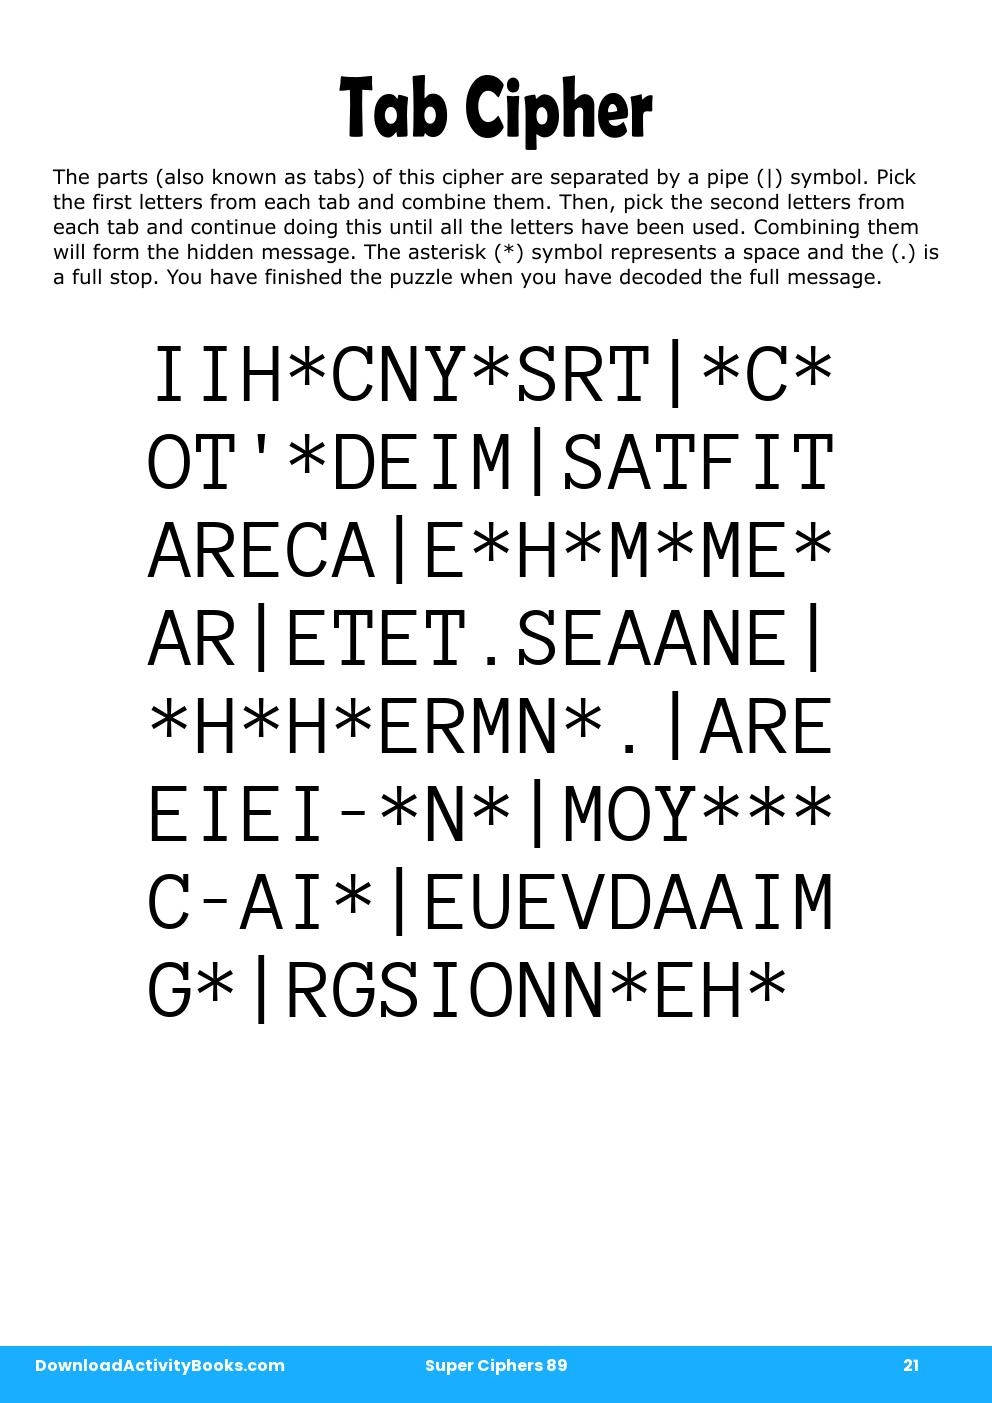 Tab Cipher in Super Ciphers 89